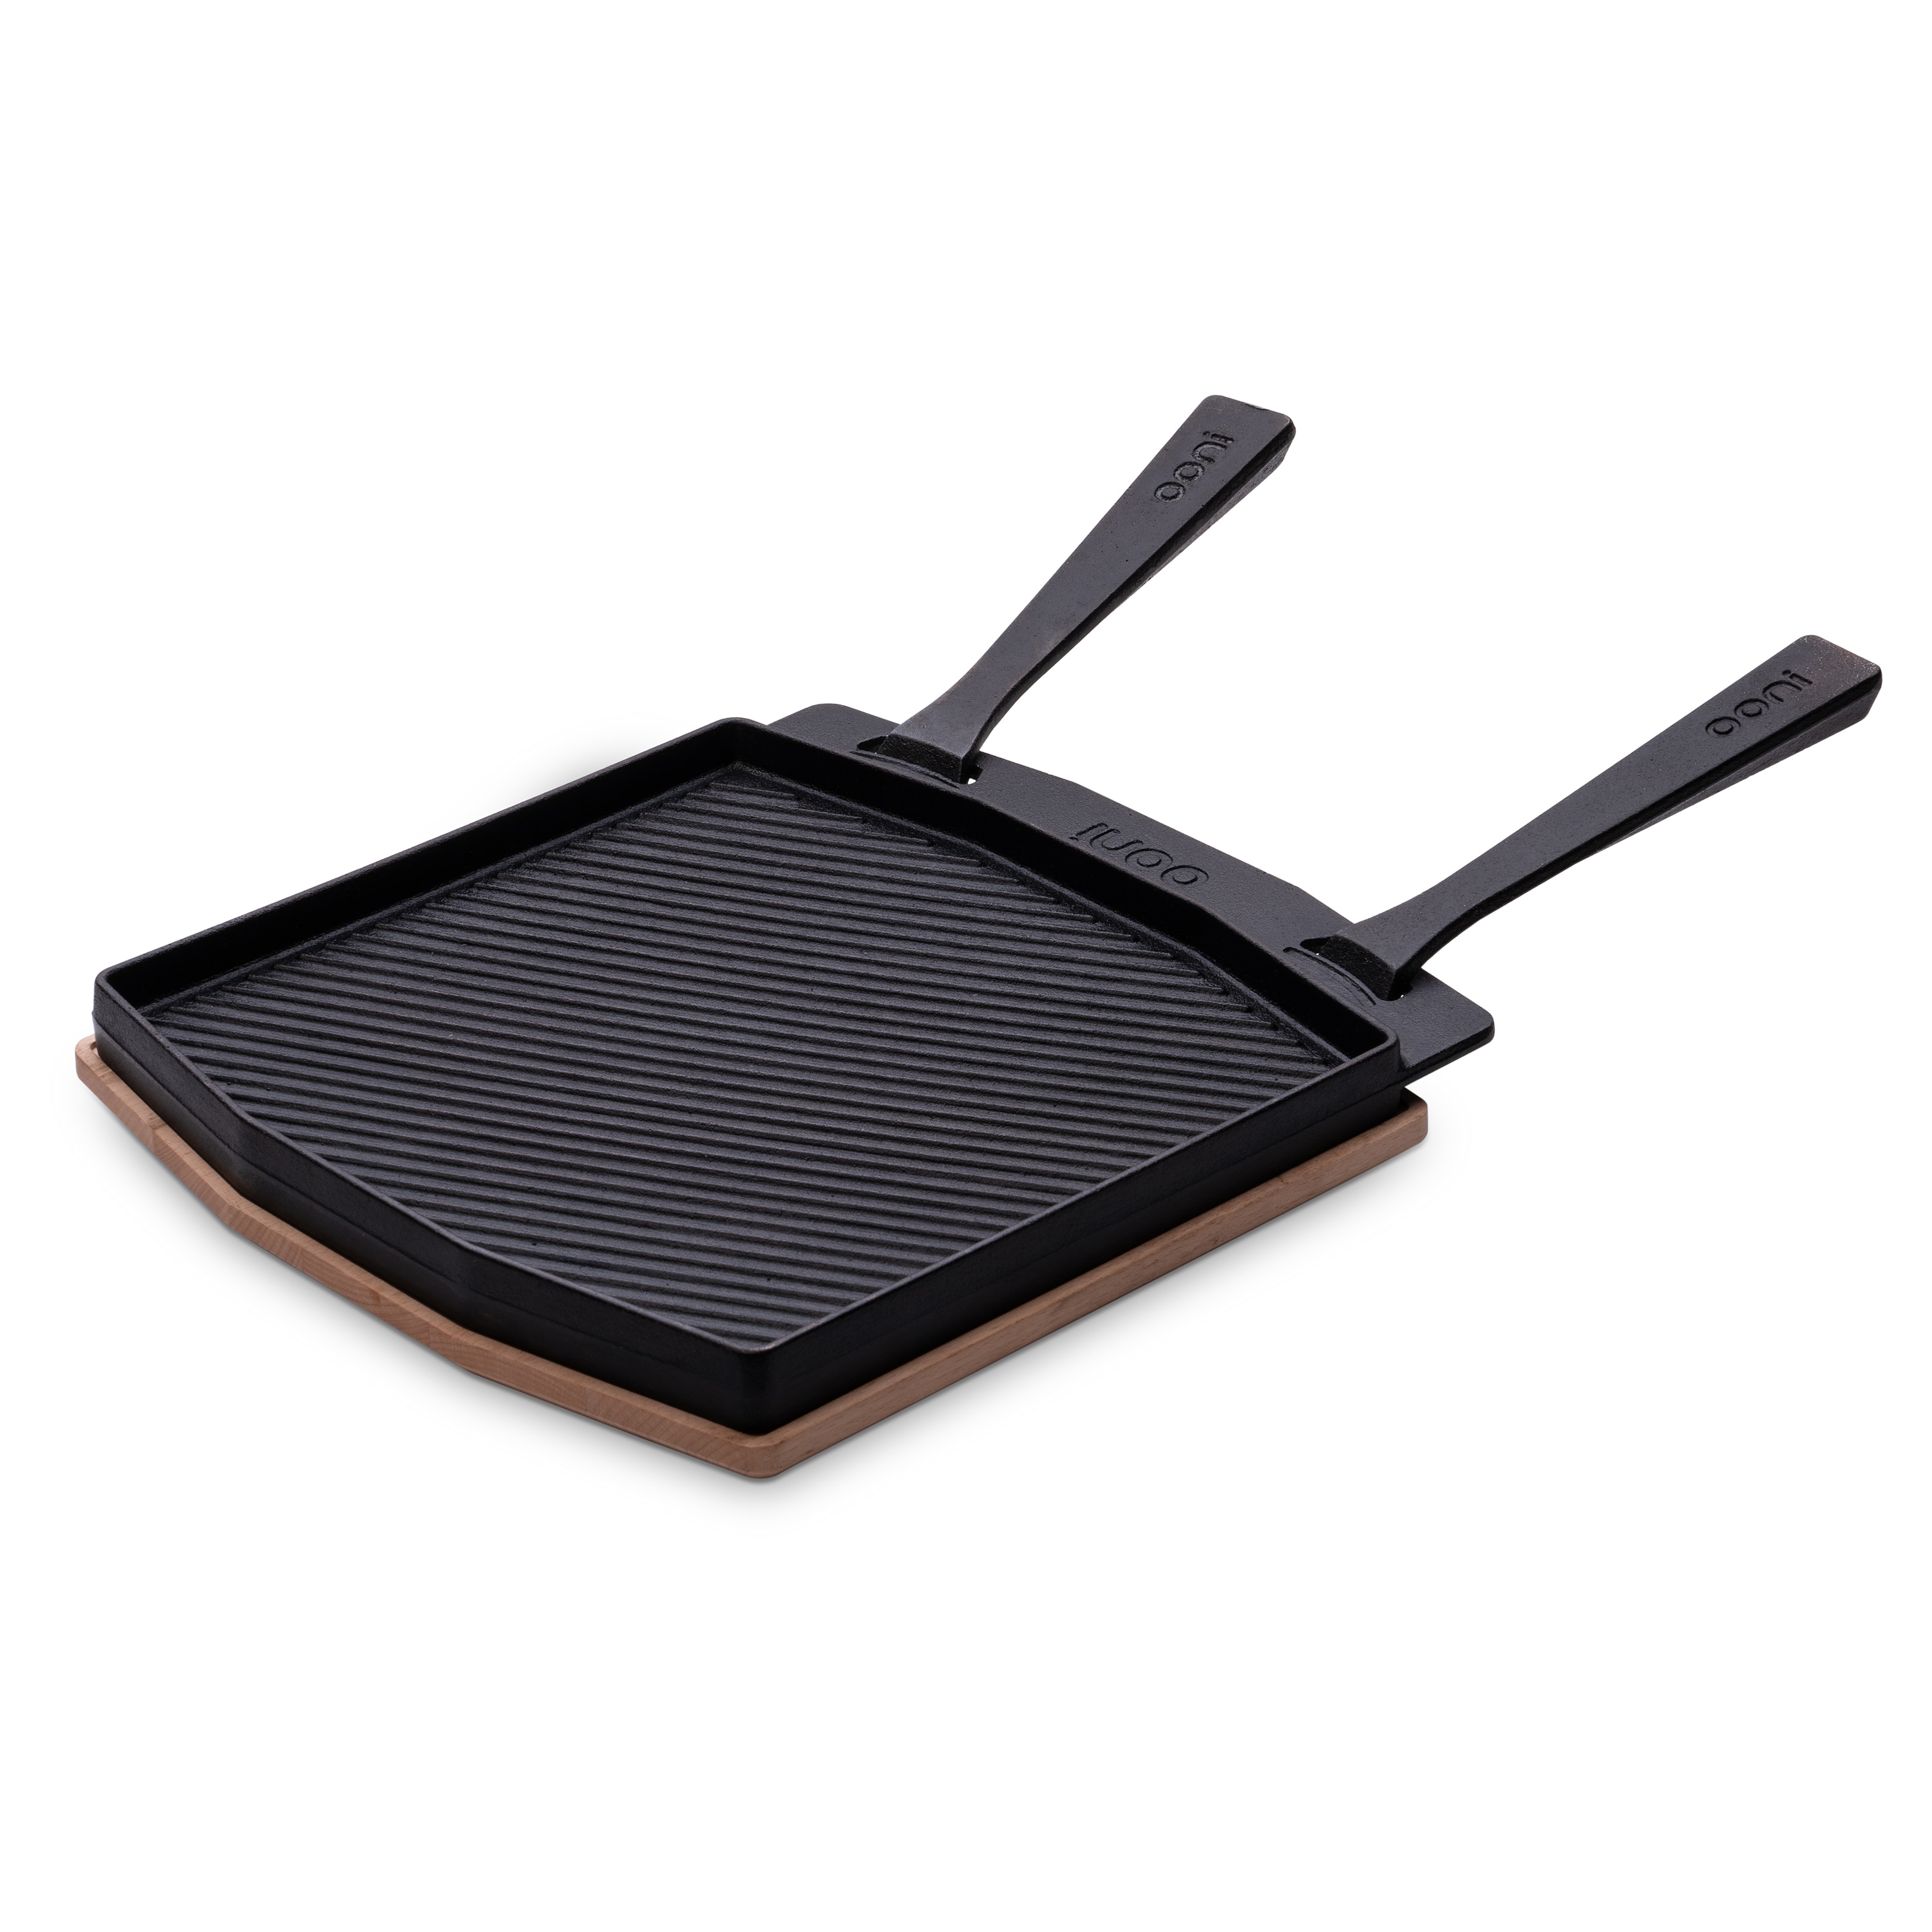 Dyna Glo 18 In. Cast Iron Pizza Pan - Groom & Sons' Hardware